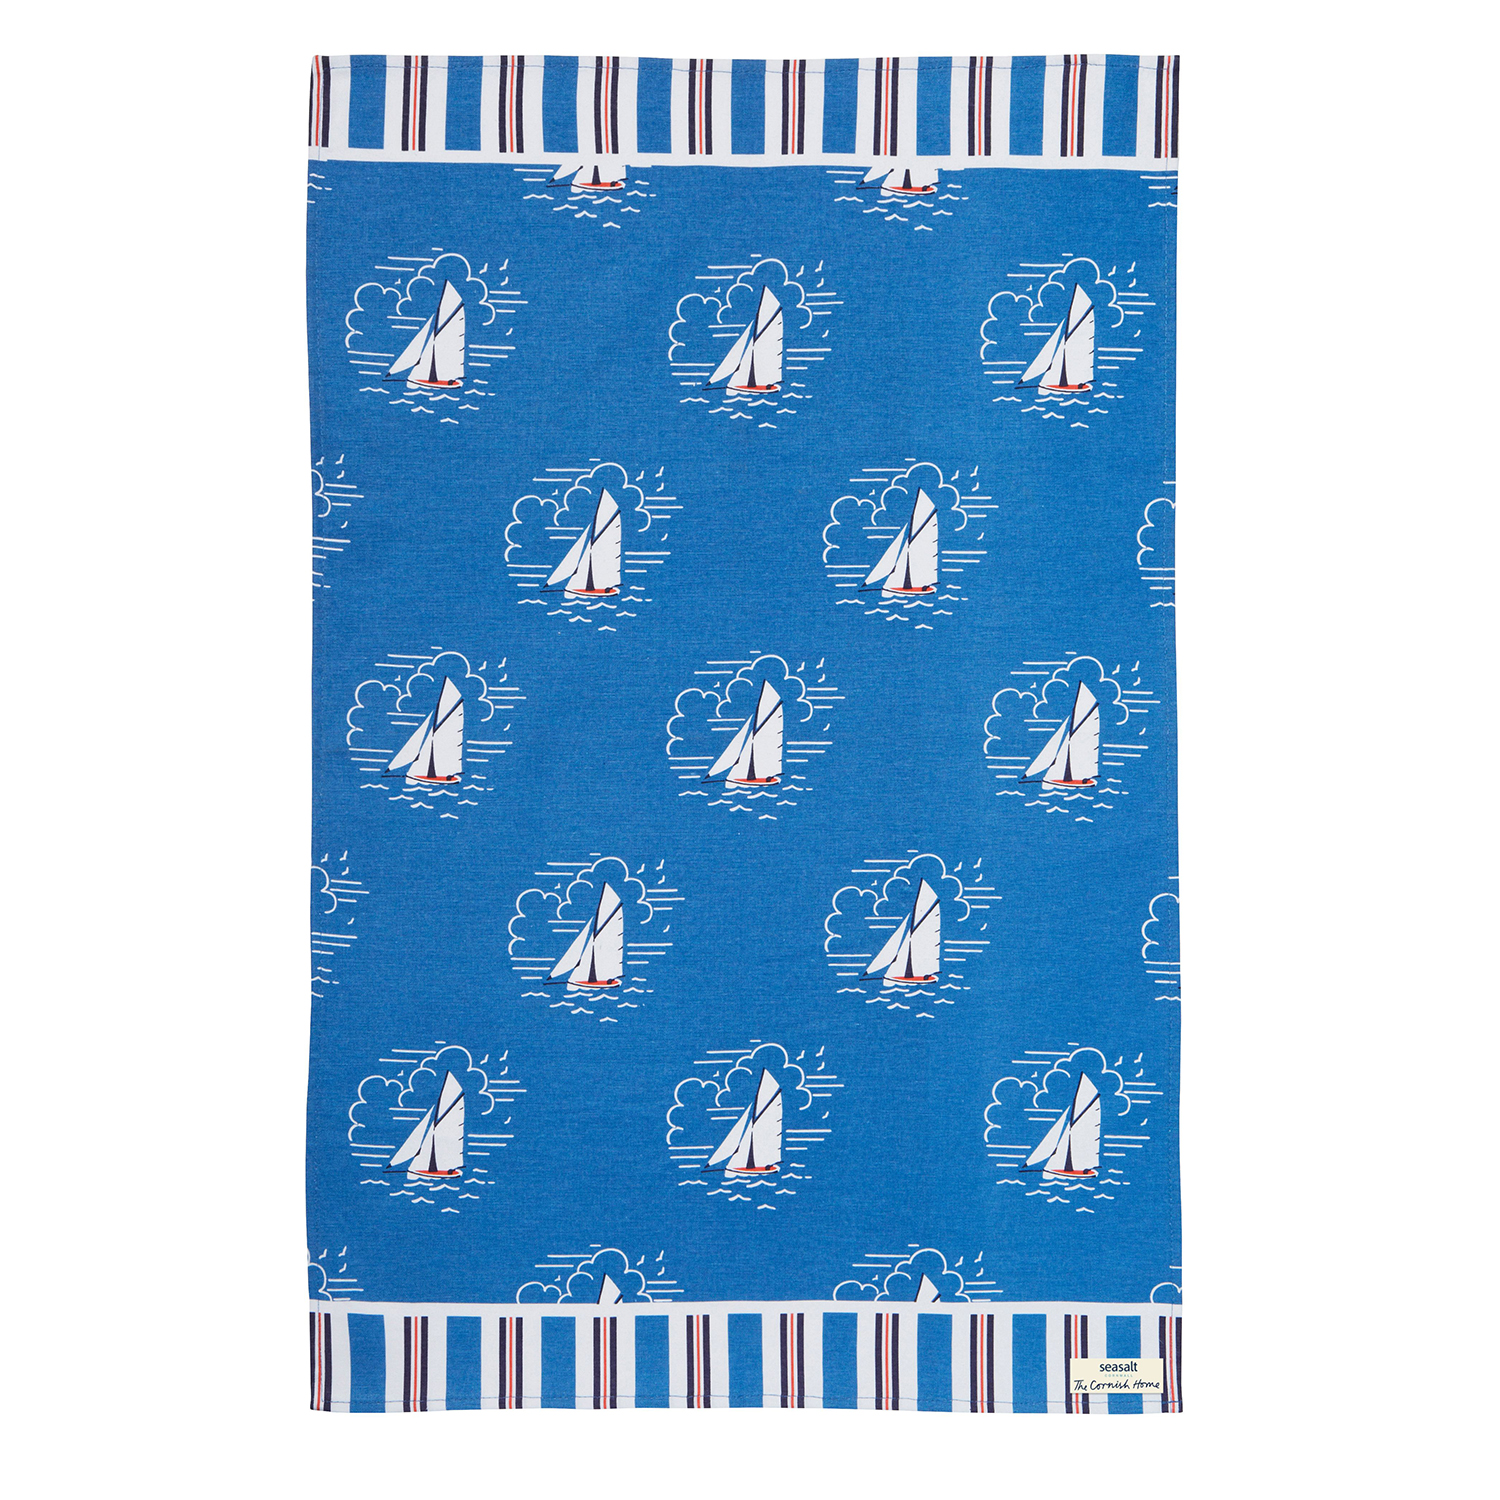 Cotton Tea Towel by Seasalt - The Seas in the Kitchen, photo main